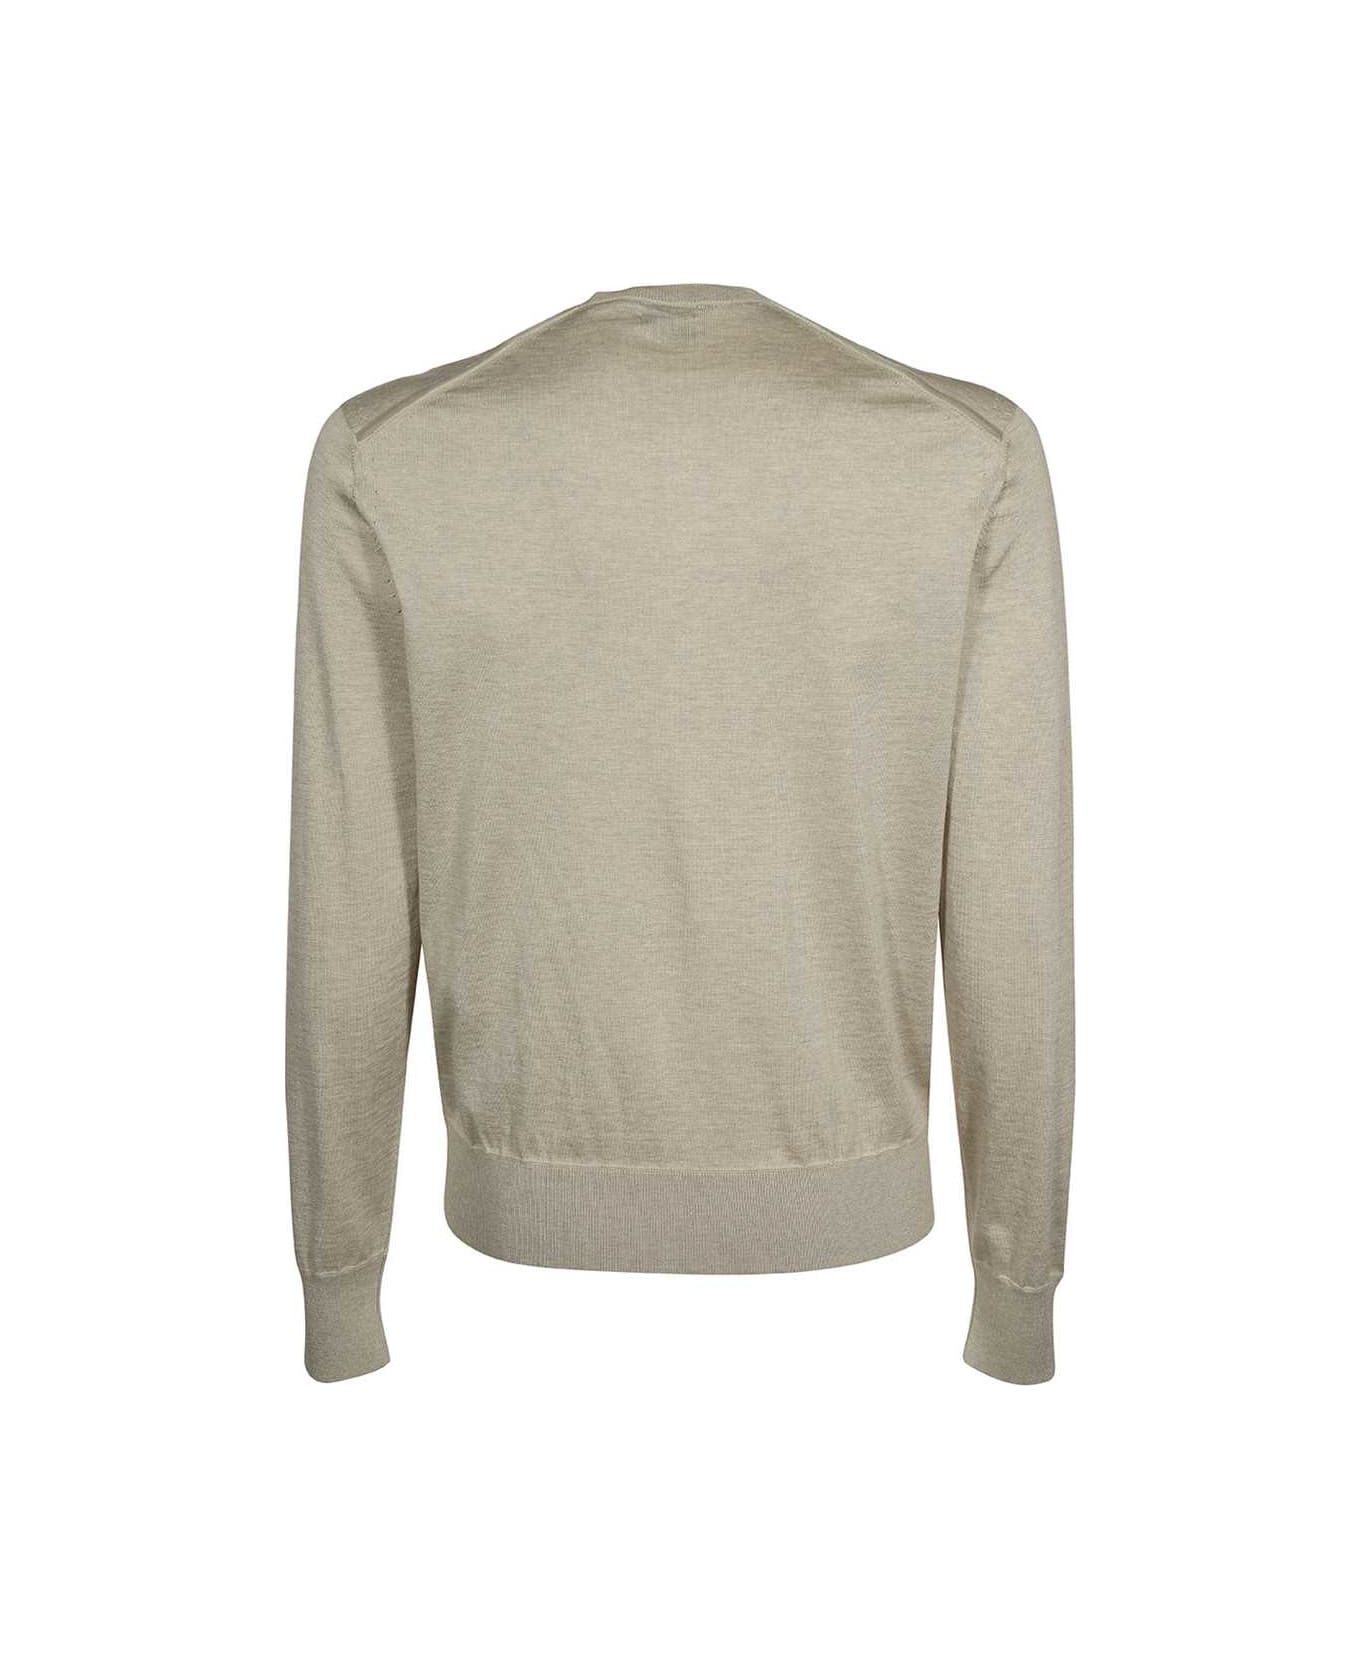 Tom Ford Cotton-silk Blend Sweater - Sand